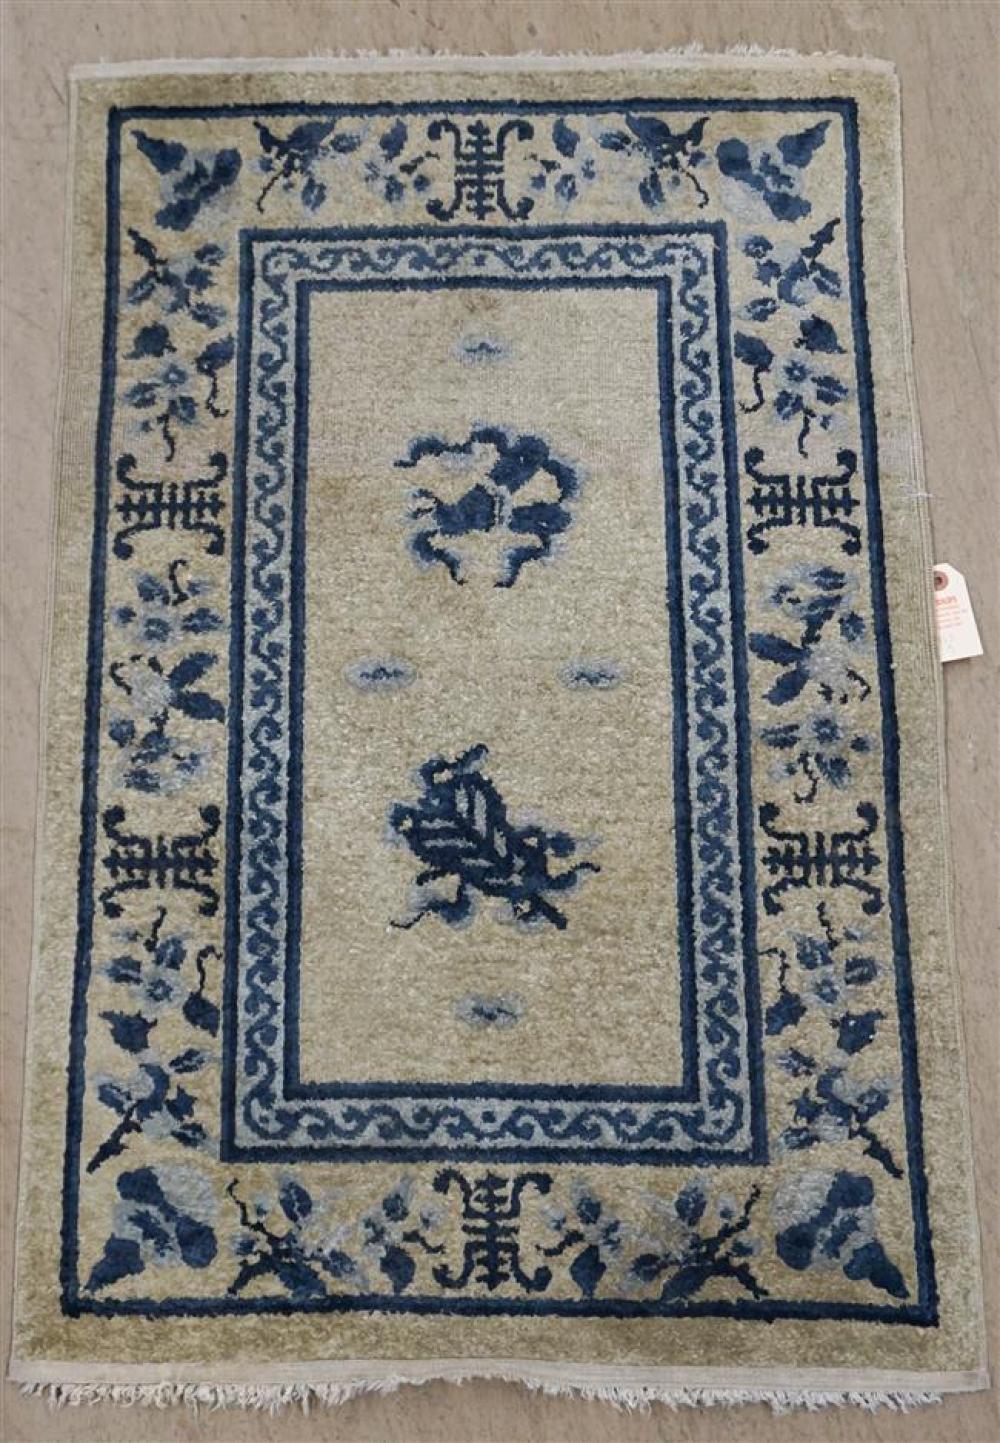 CHINESE RUG 3 FT 1 IN X 2 FTChinese 321e9b